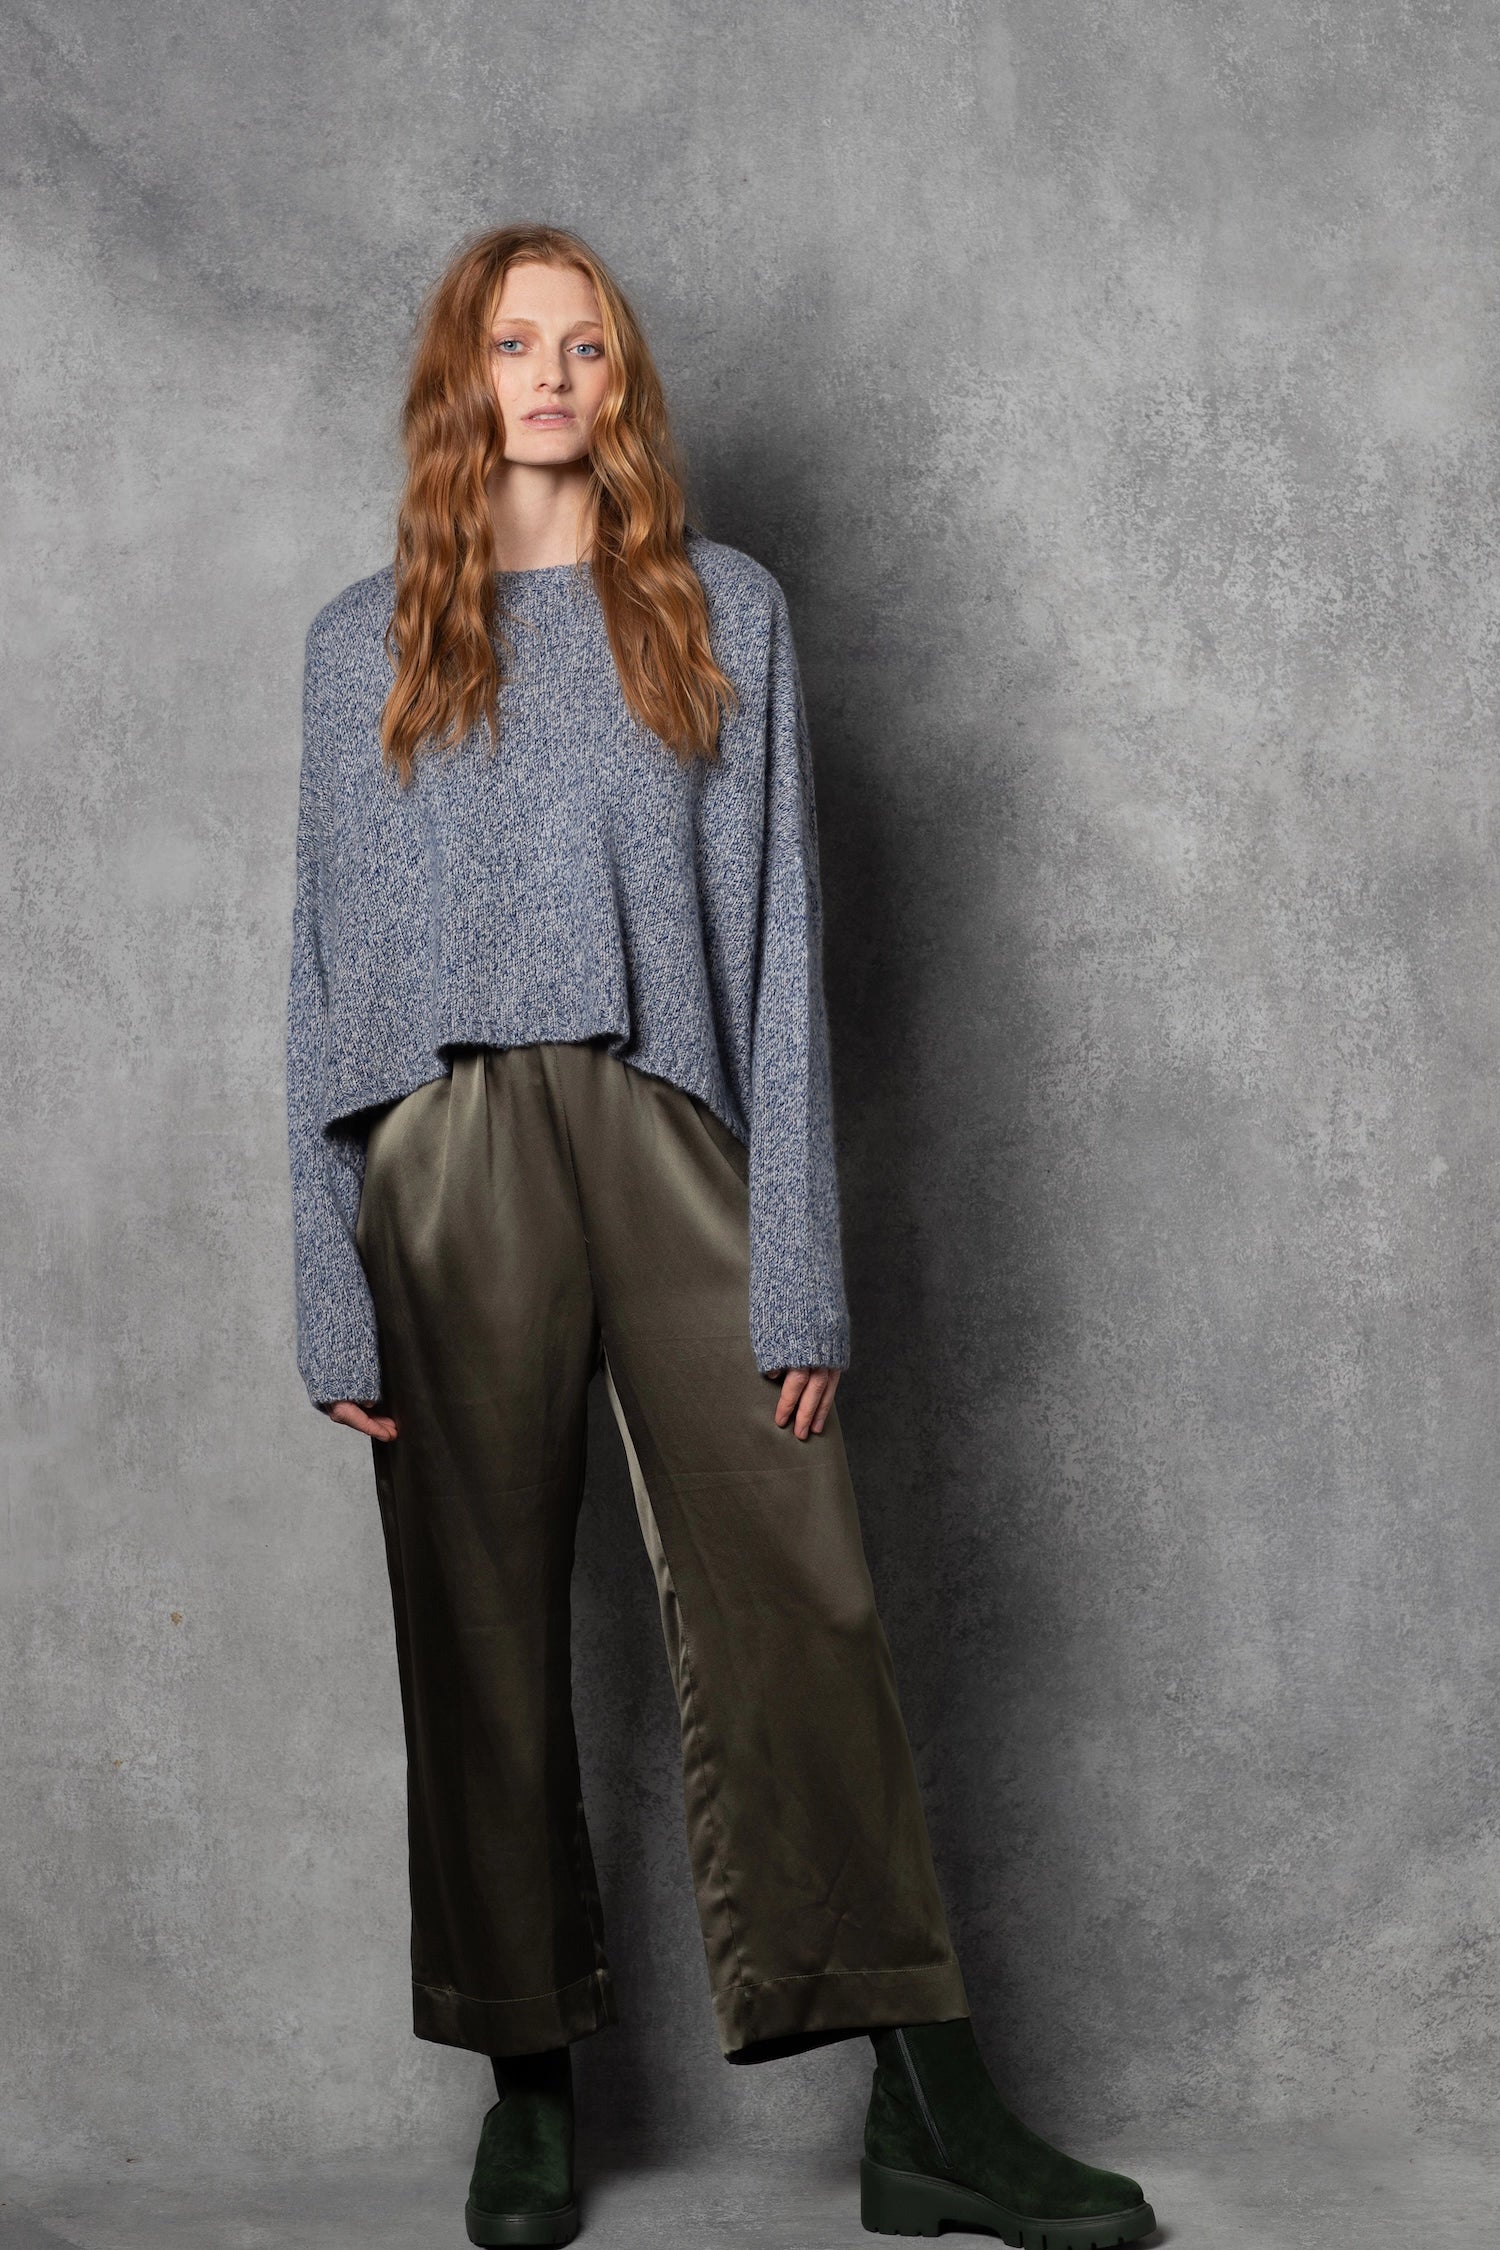 cropped luxury cashmere sweater in blue and grey